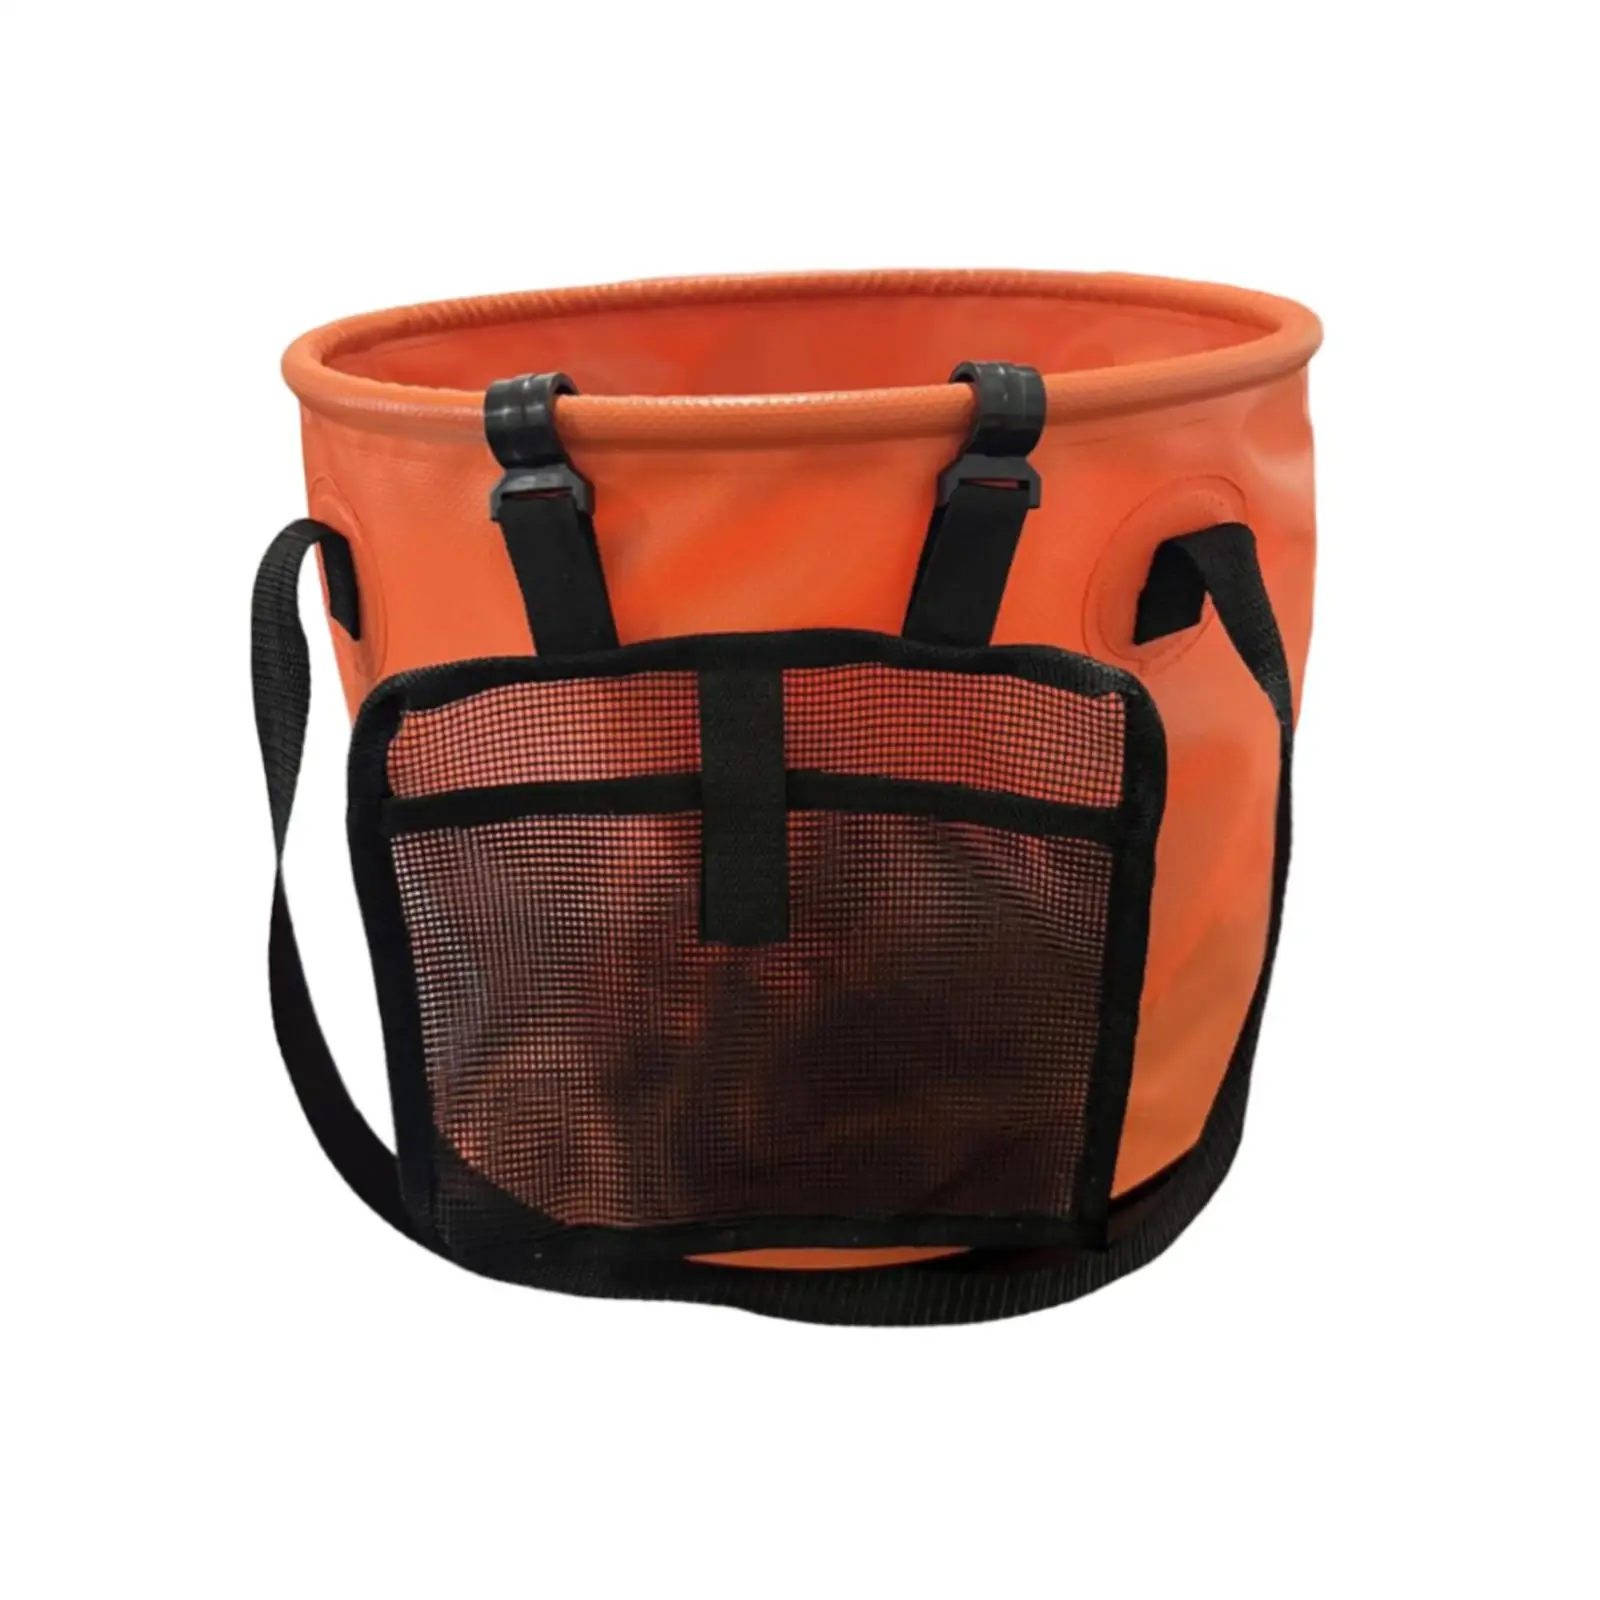 Water Container Portable Collapsible Bucket for Hiking Car Washing Boating